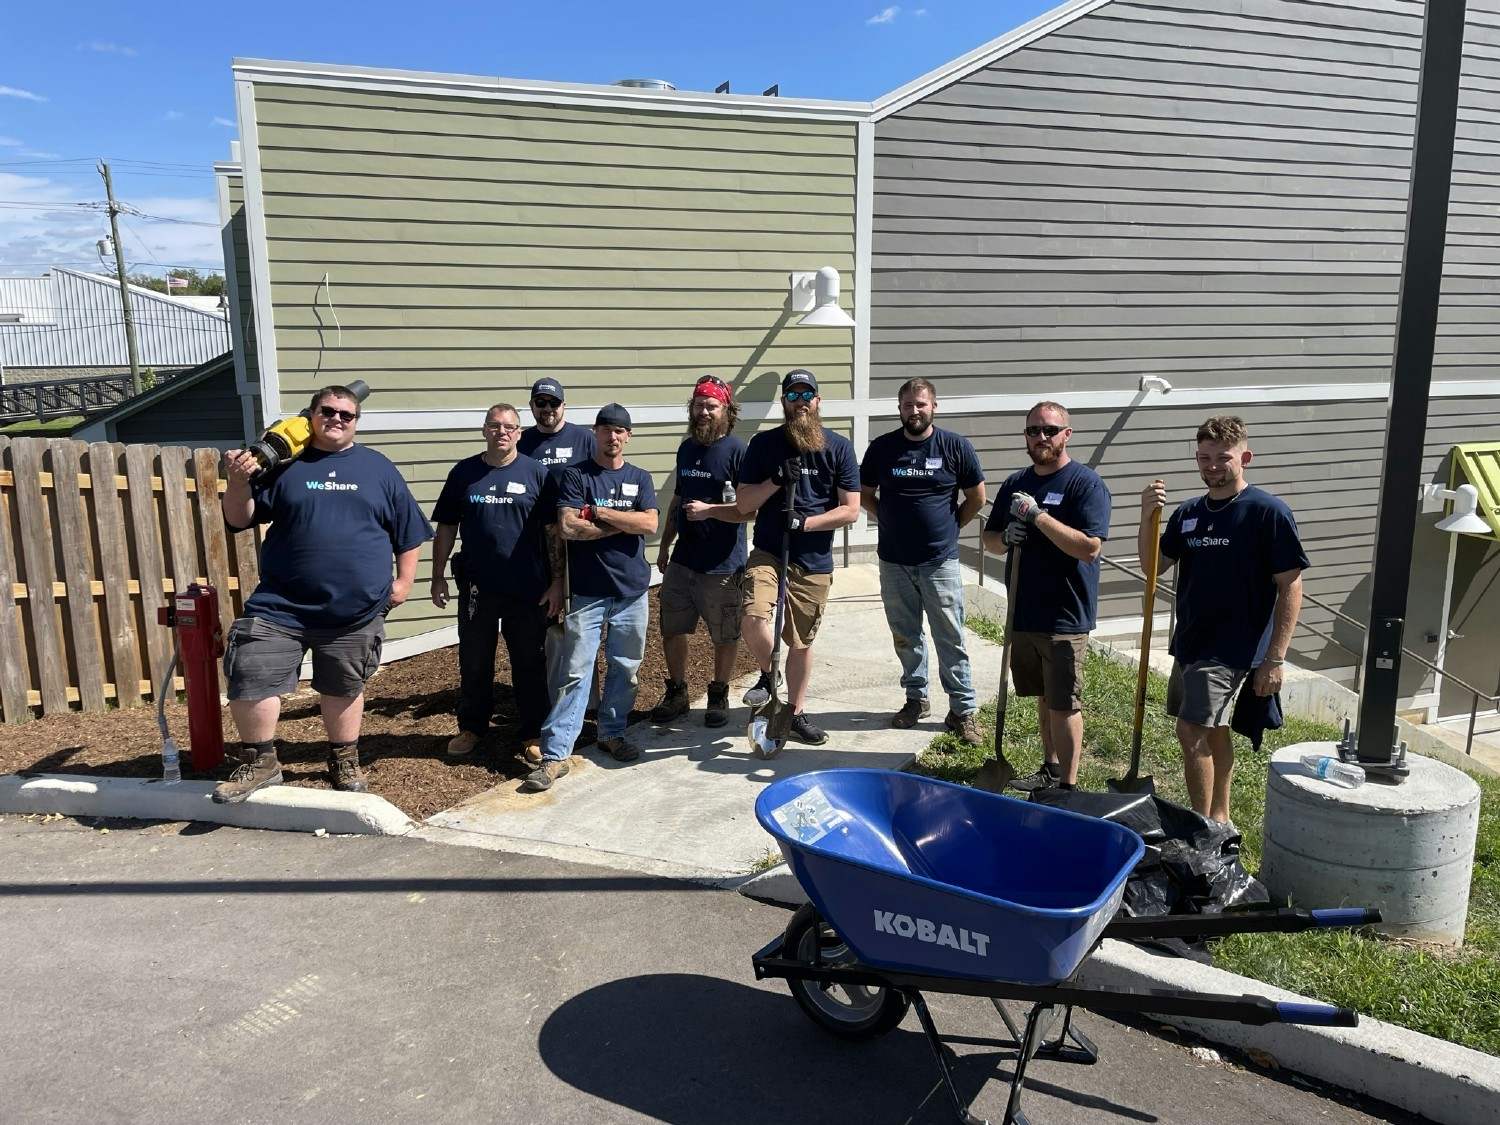 Our Indiana team was hard at work giving back to their local community. 